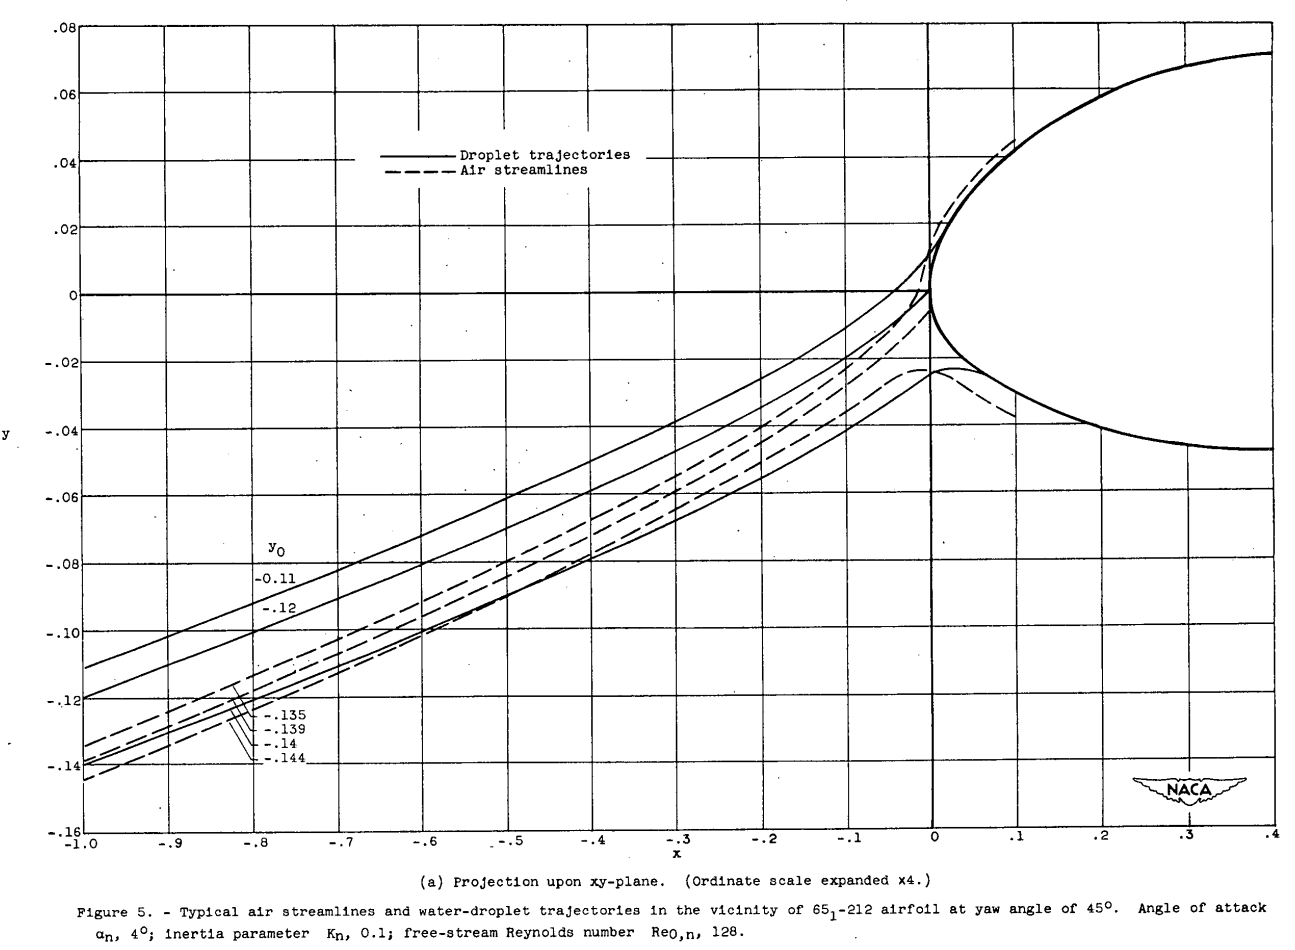 Figure 5a. Projection upon xy-plane. Typical air streamlines and water-droplet trajectories in
the vicinity of 651-212 airfoil at yaw angle of 45° Angle of attack α, 4;
inertia parameter K, 0.1; free-stream Reynolds number Reo,n, 128.